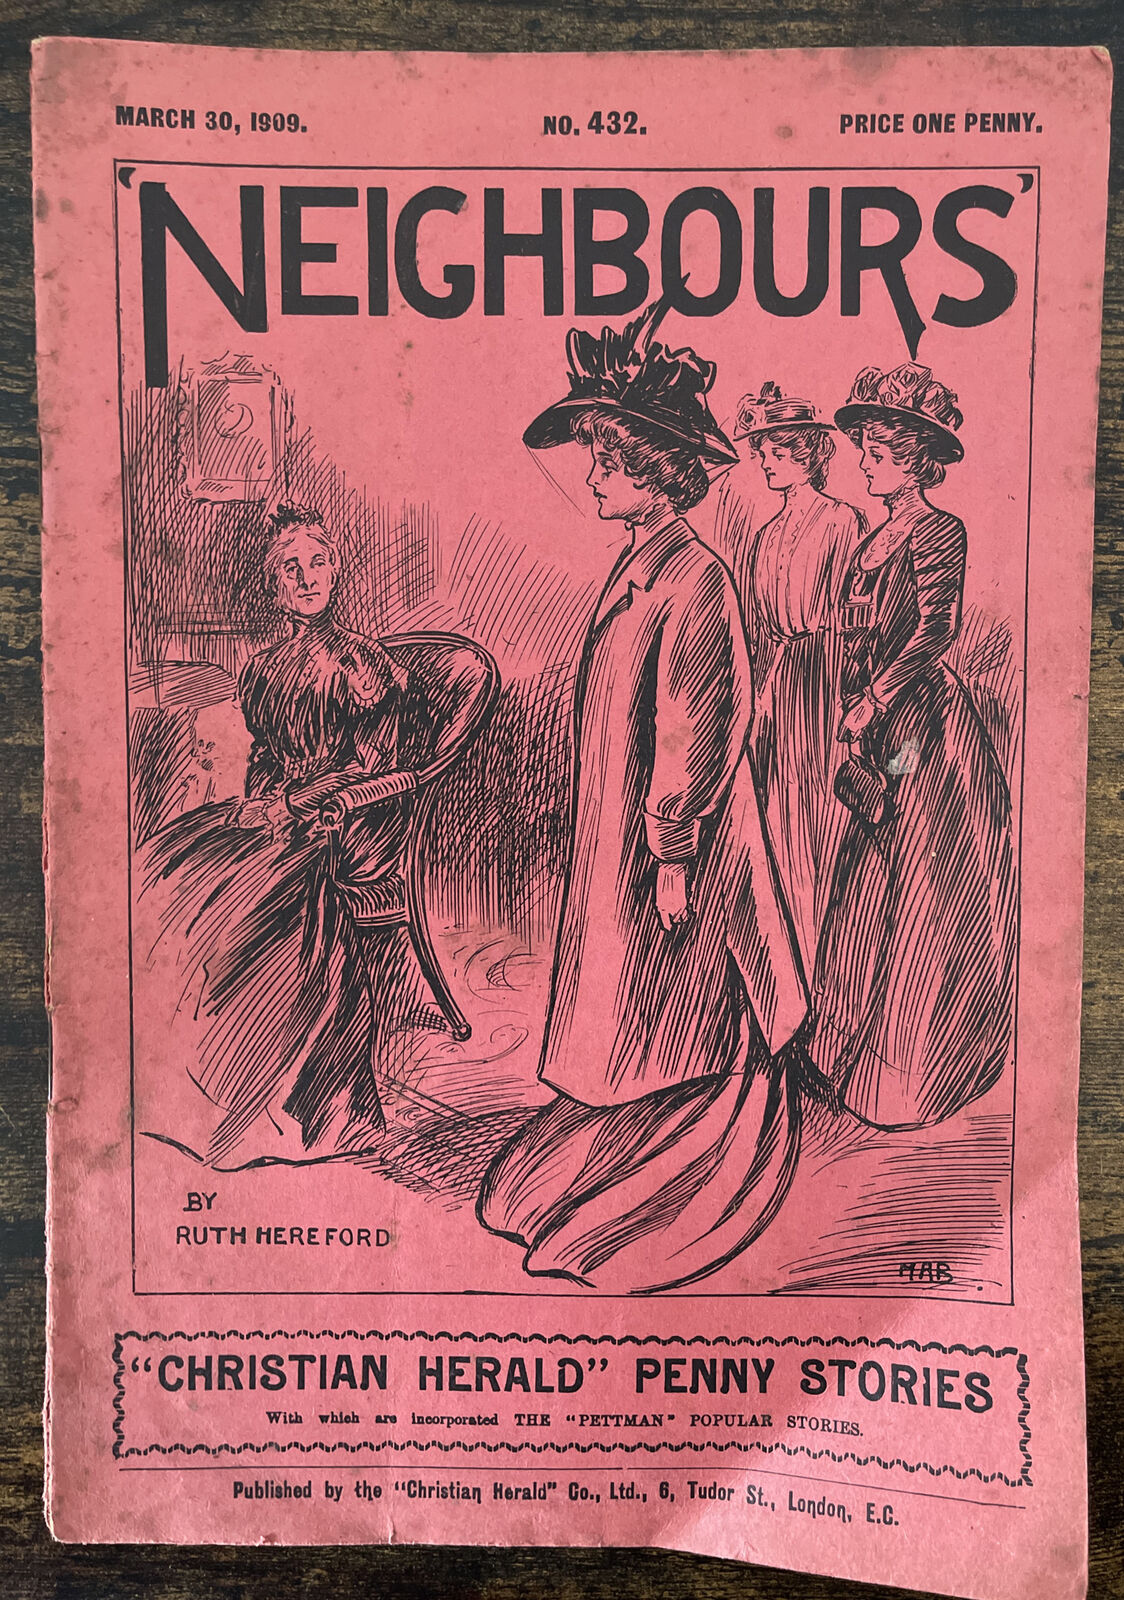 1909 Christian Herald Penny Stories  “Neighbours”